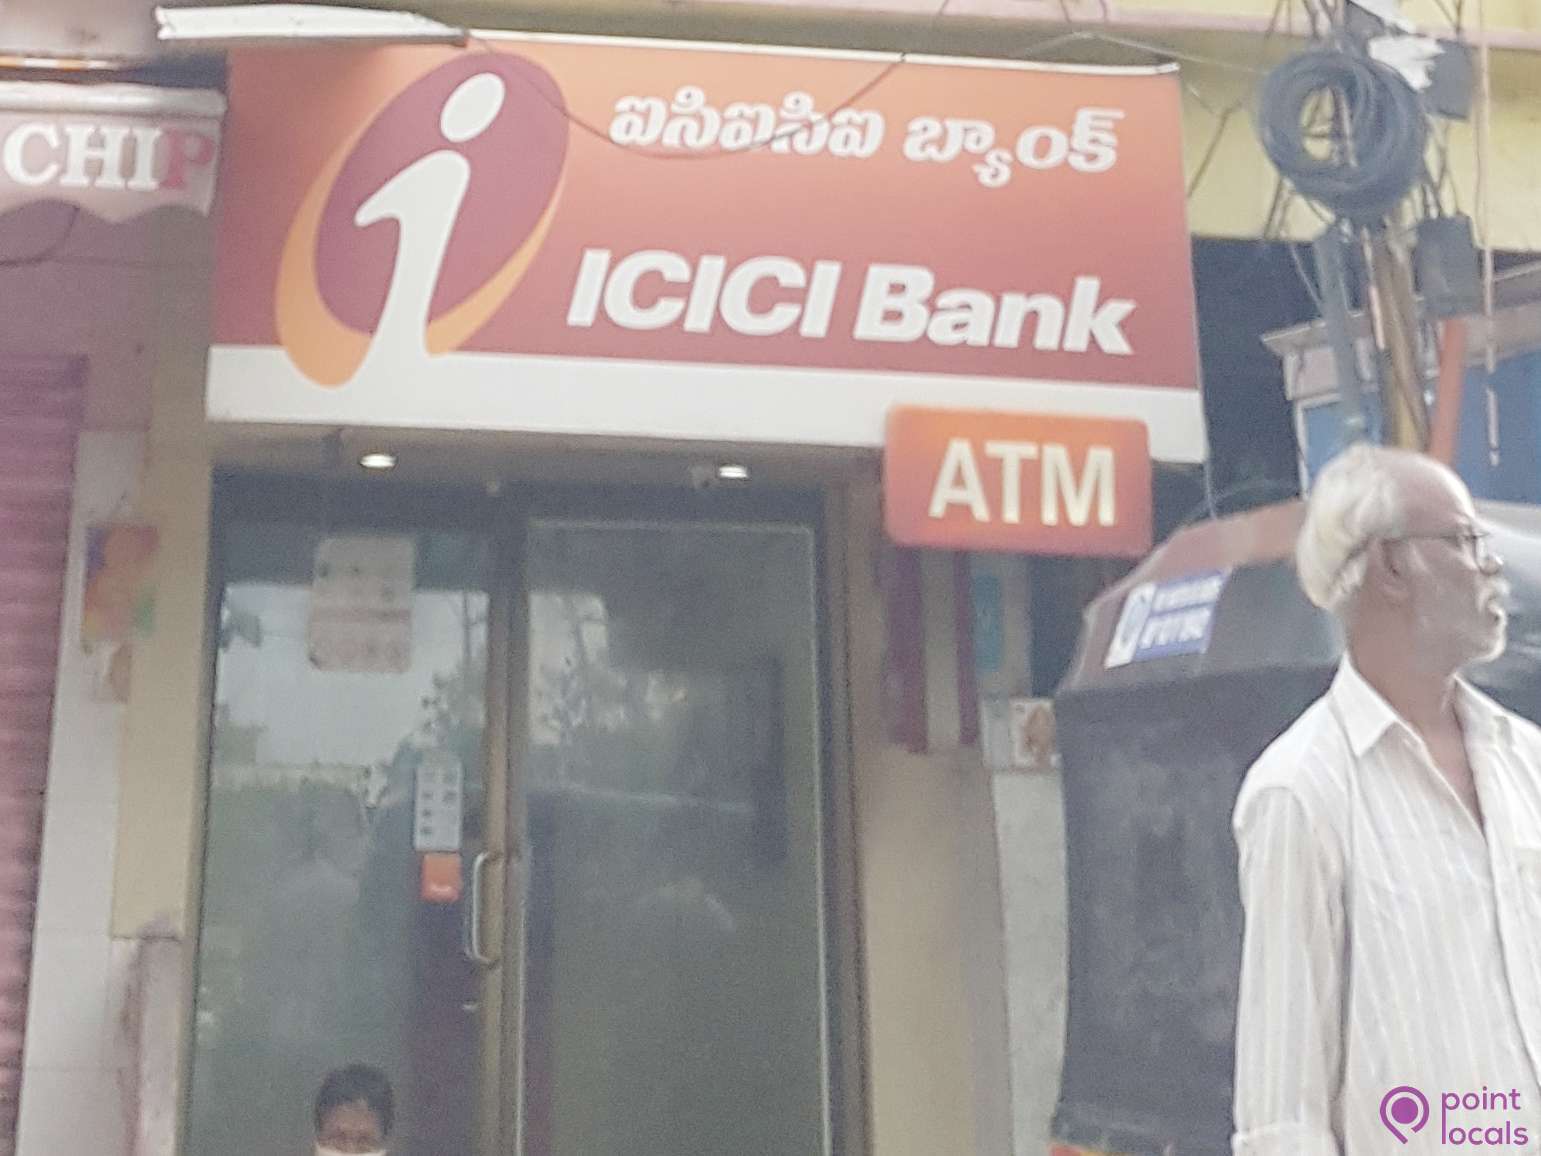 ICICI Bank ATM - ATM in Hyderabad,Telangana | Pointlocals